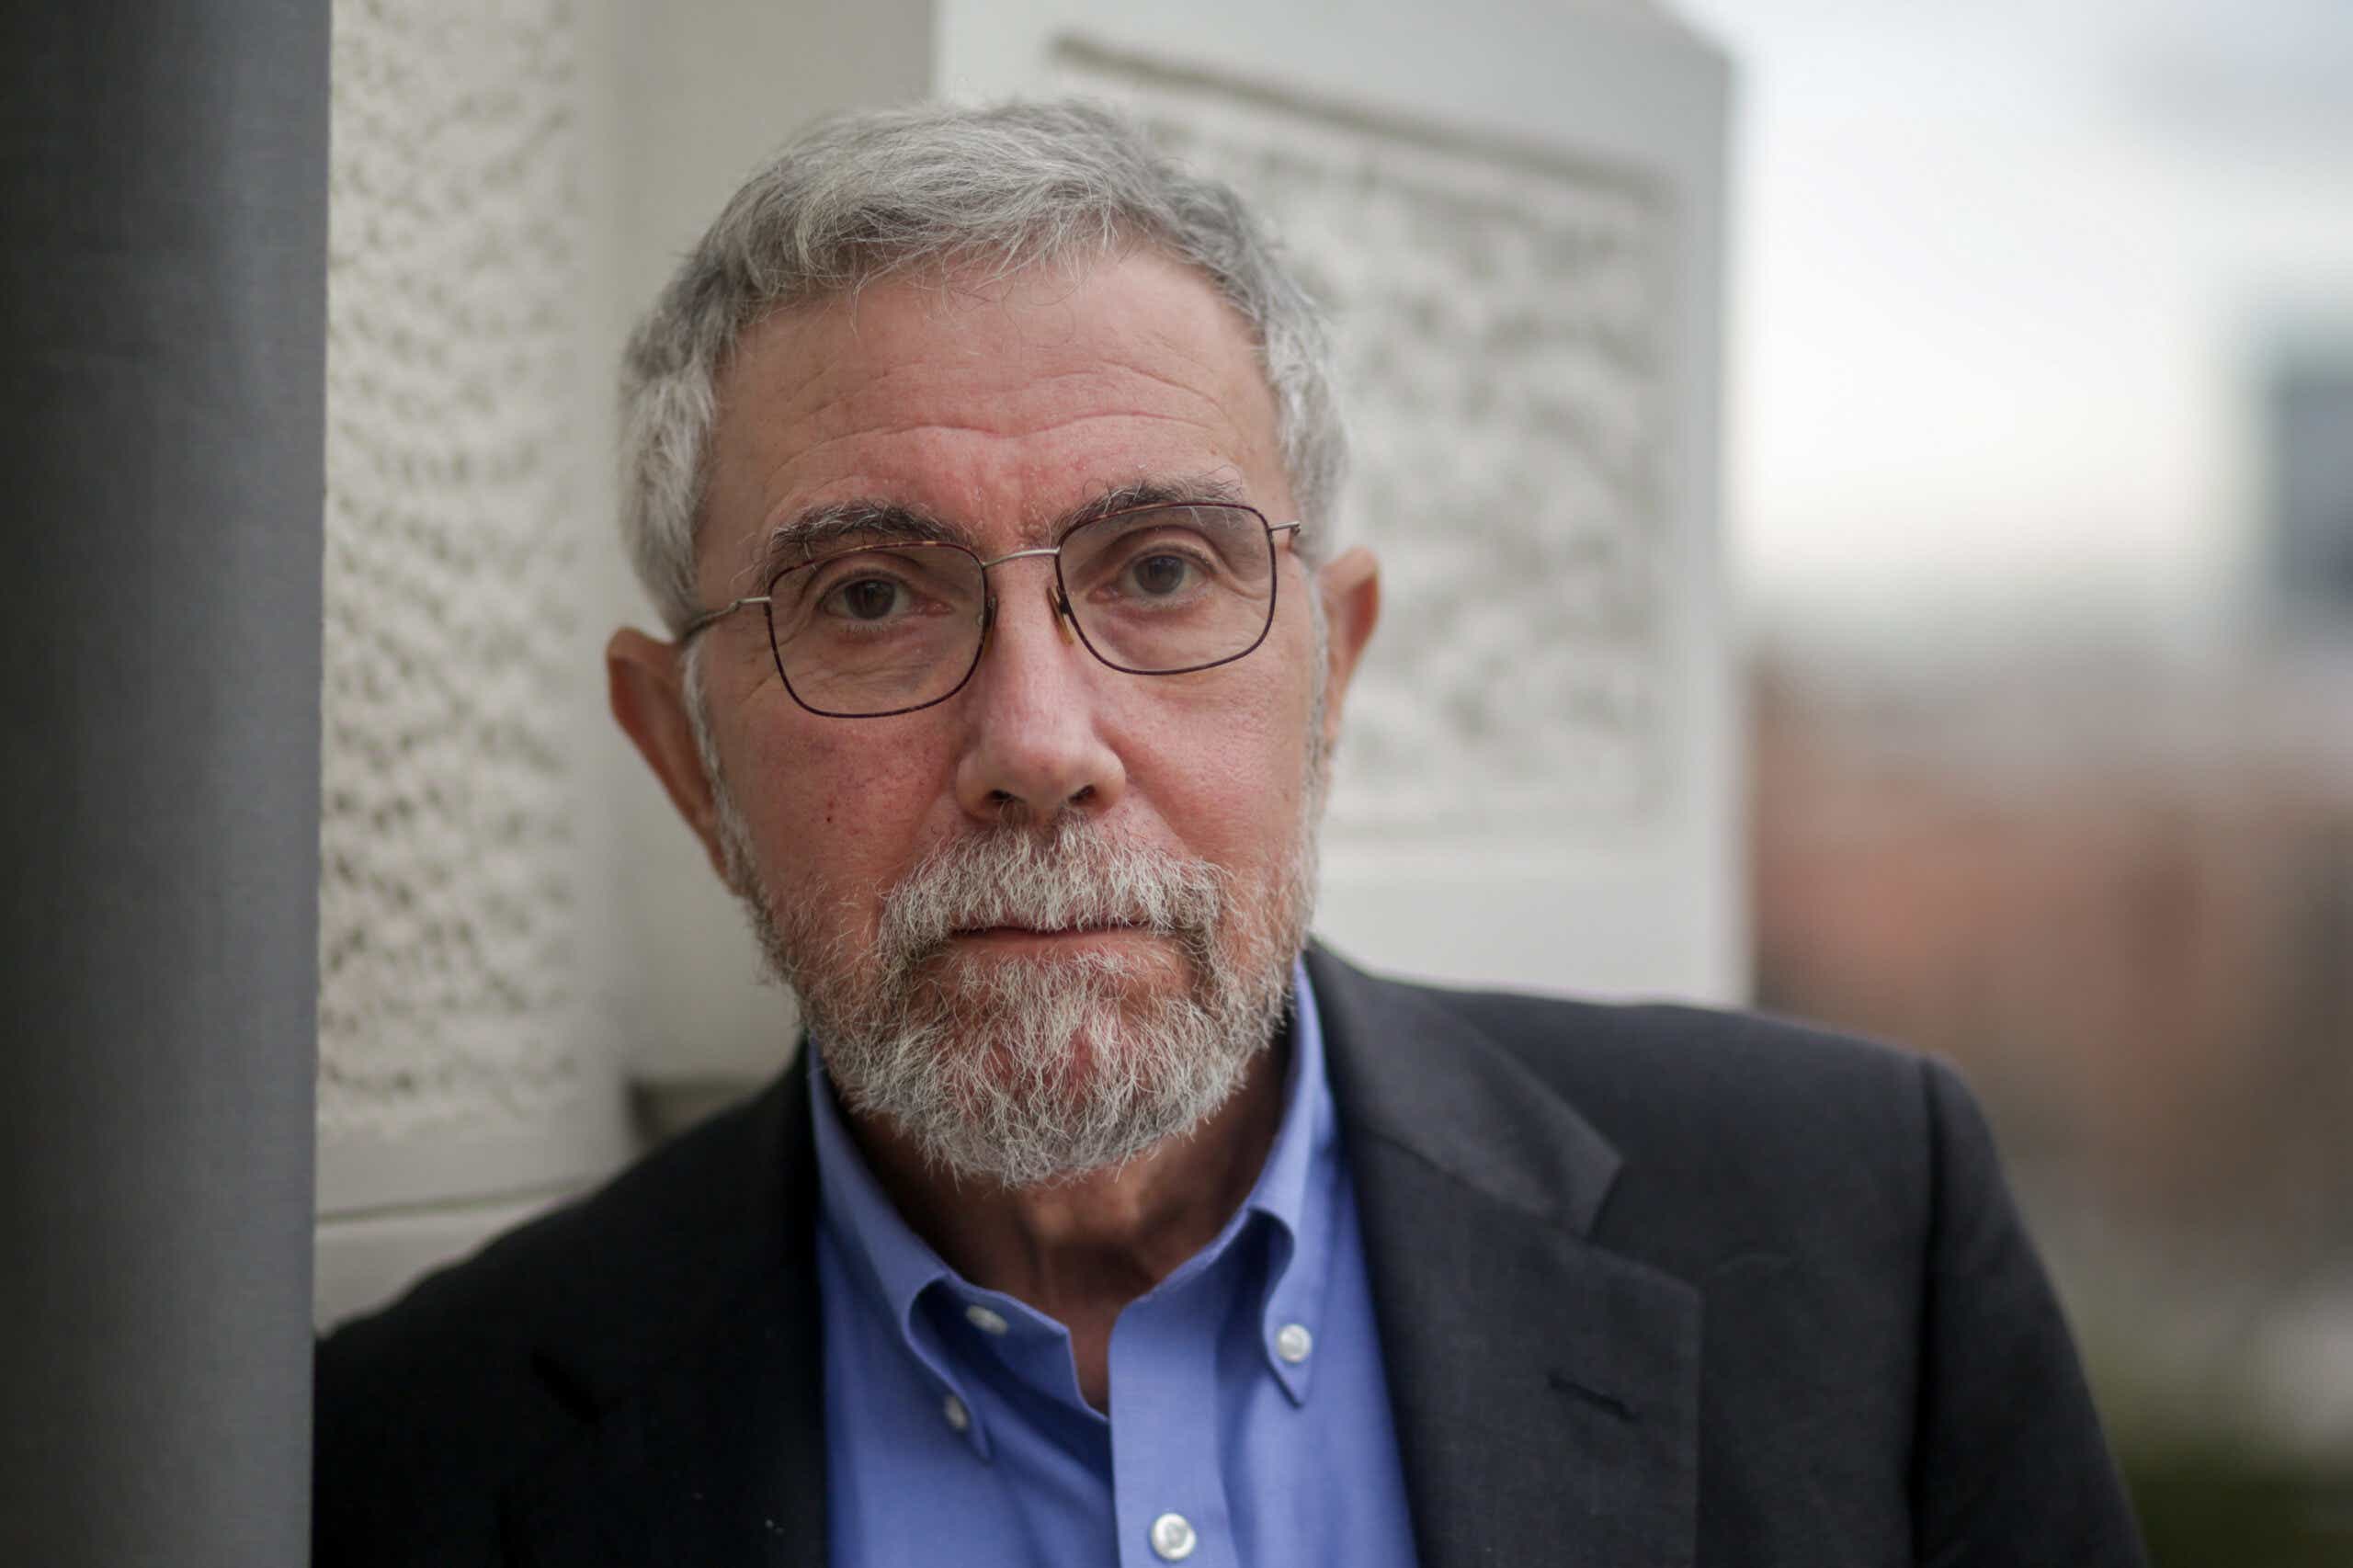 Portraits Of The Economist Paul Krugman At The Rafael Del Pino Foundation In Madrid